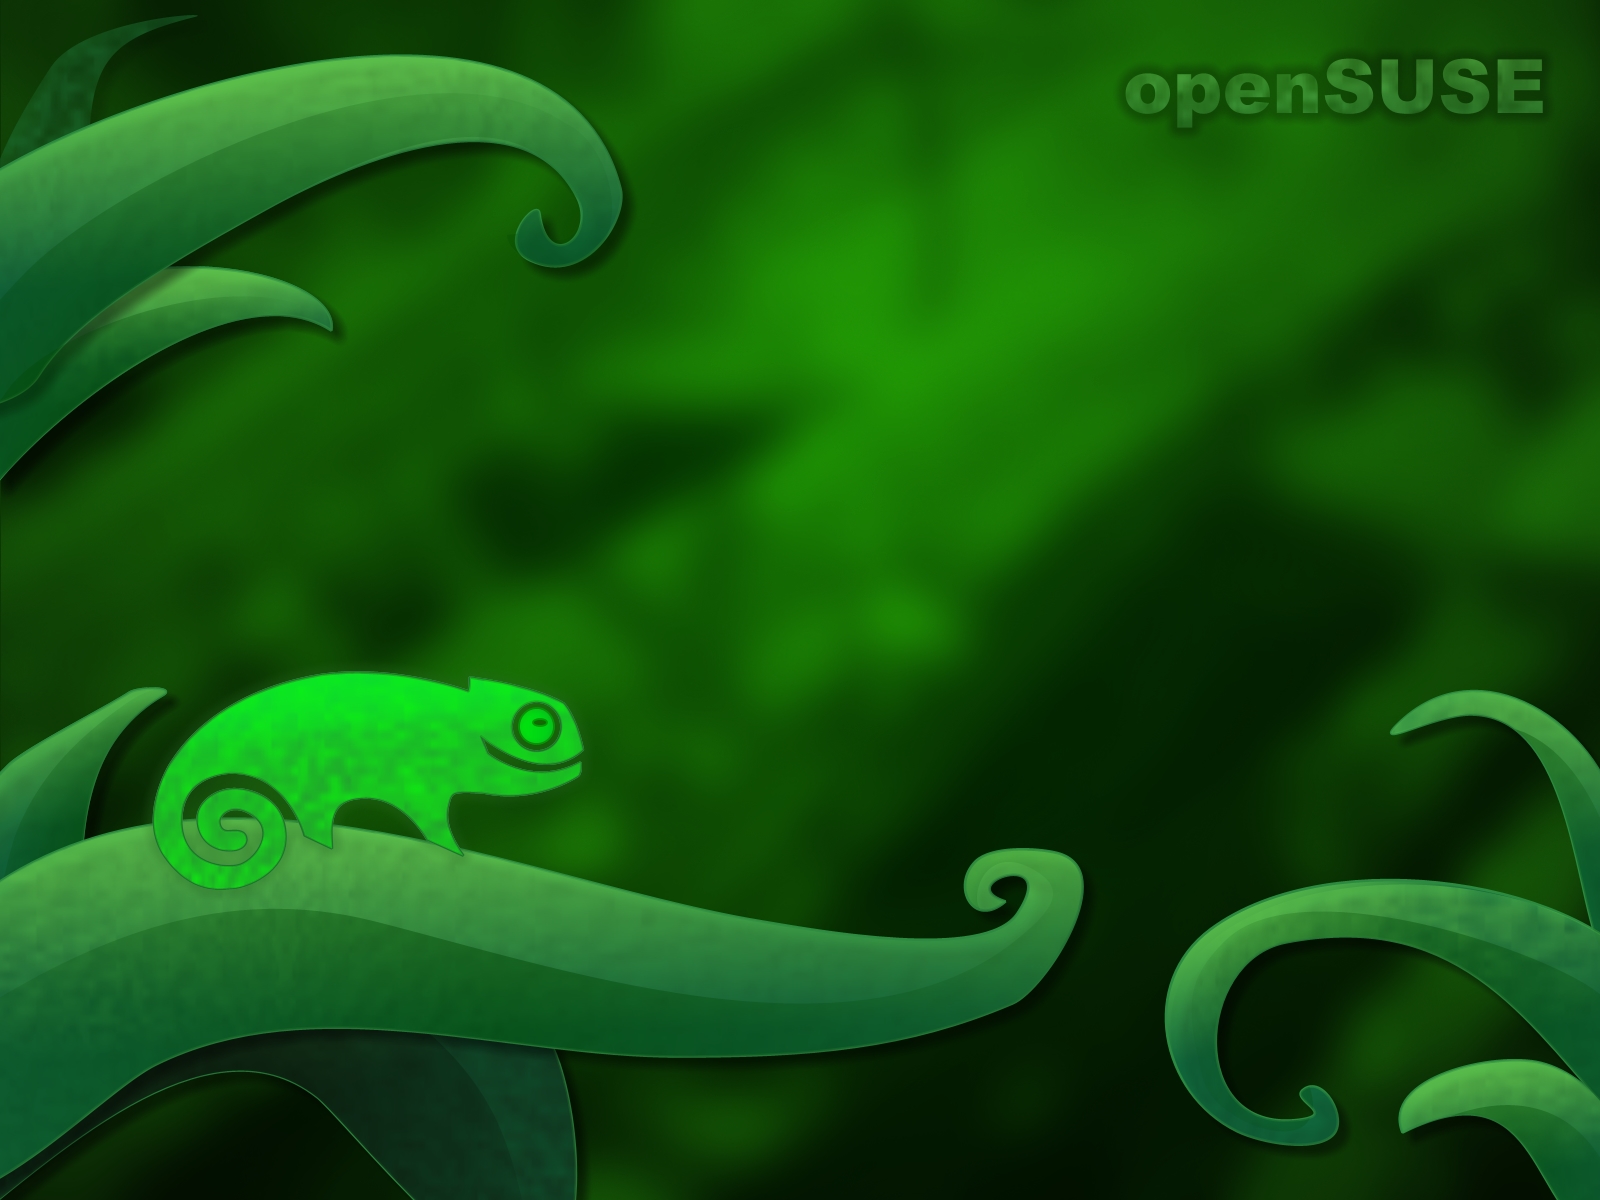 Opensuse Linuxway